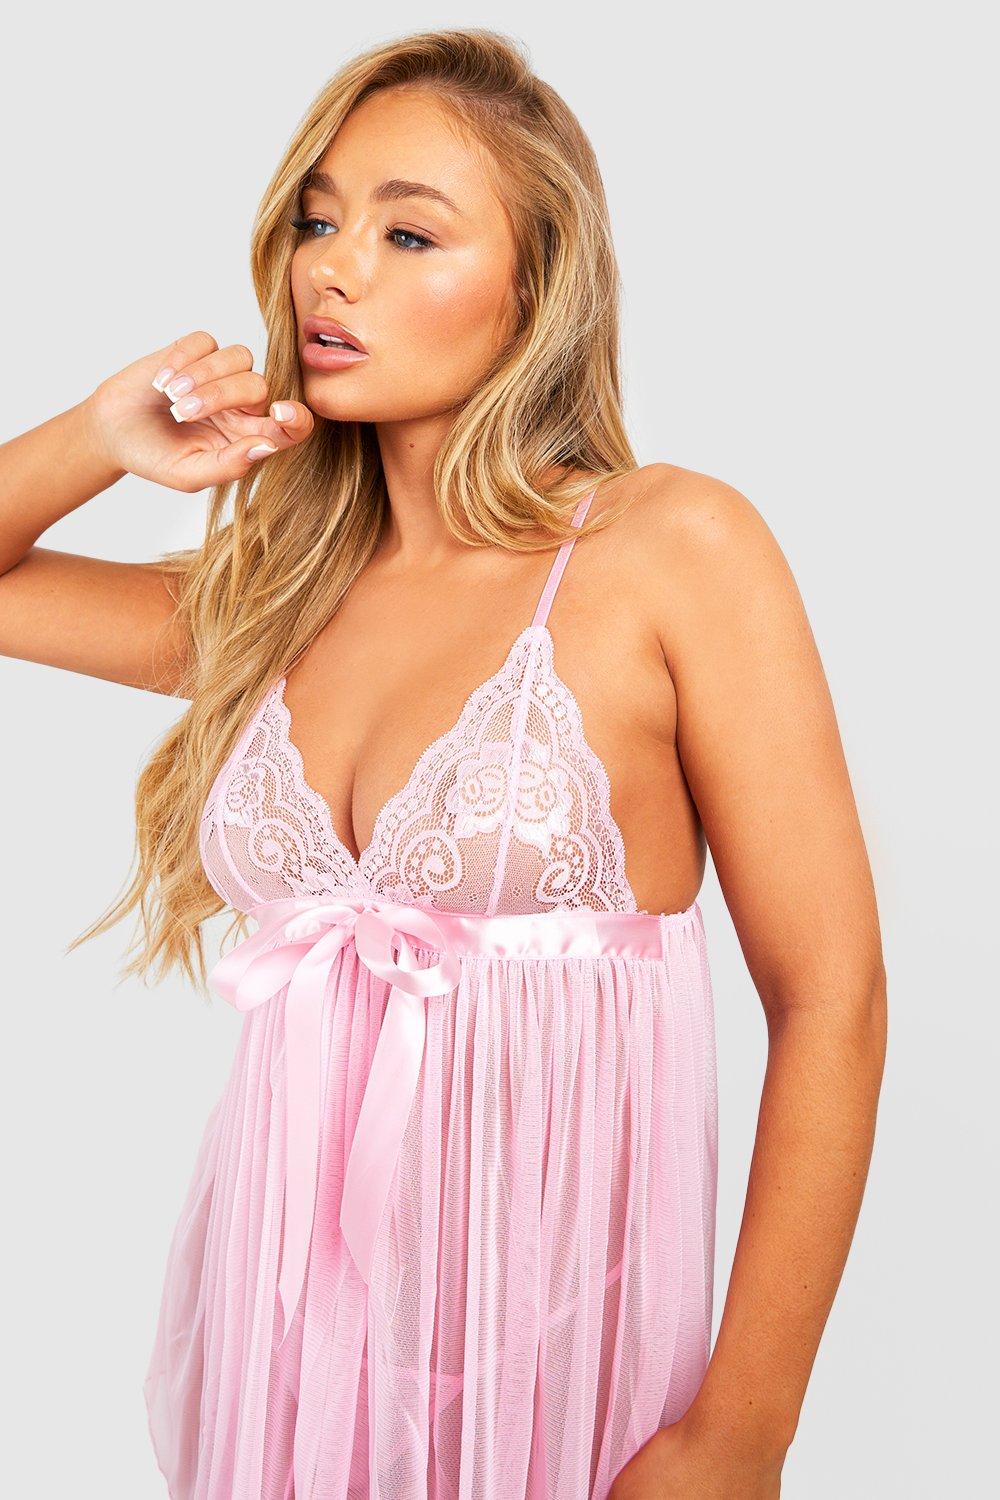 Buy Victoria's Secret Black Lace Pleated Babydoll from the Next UK online  shop